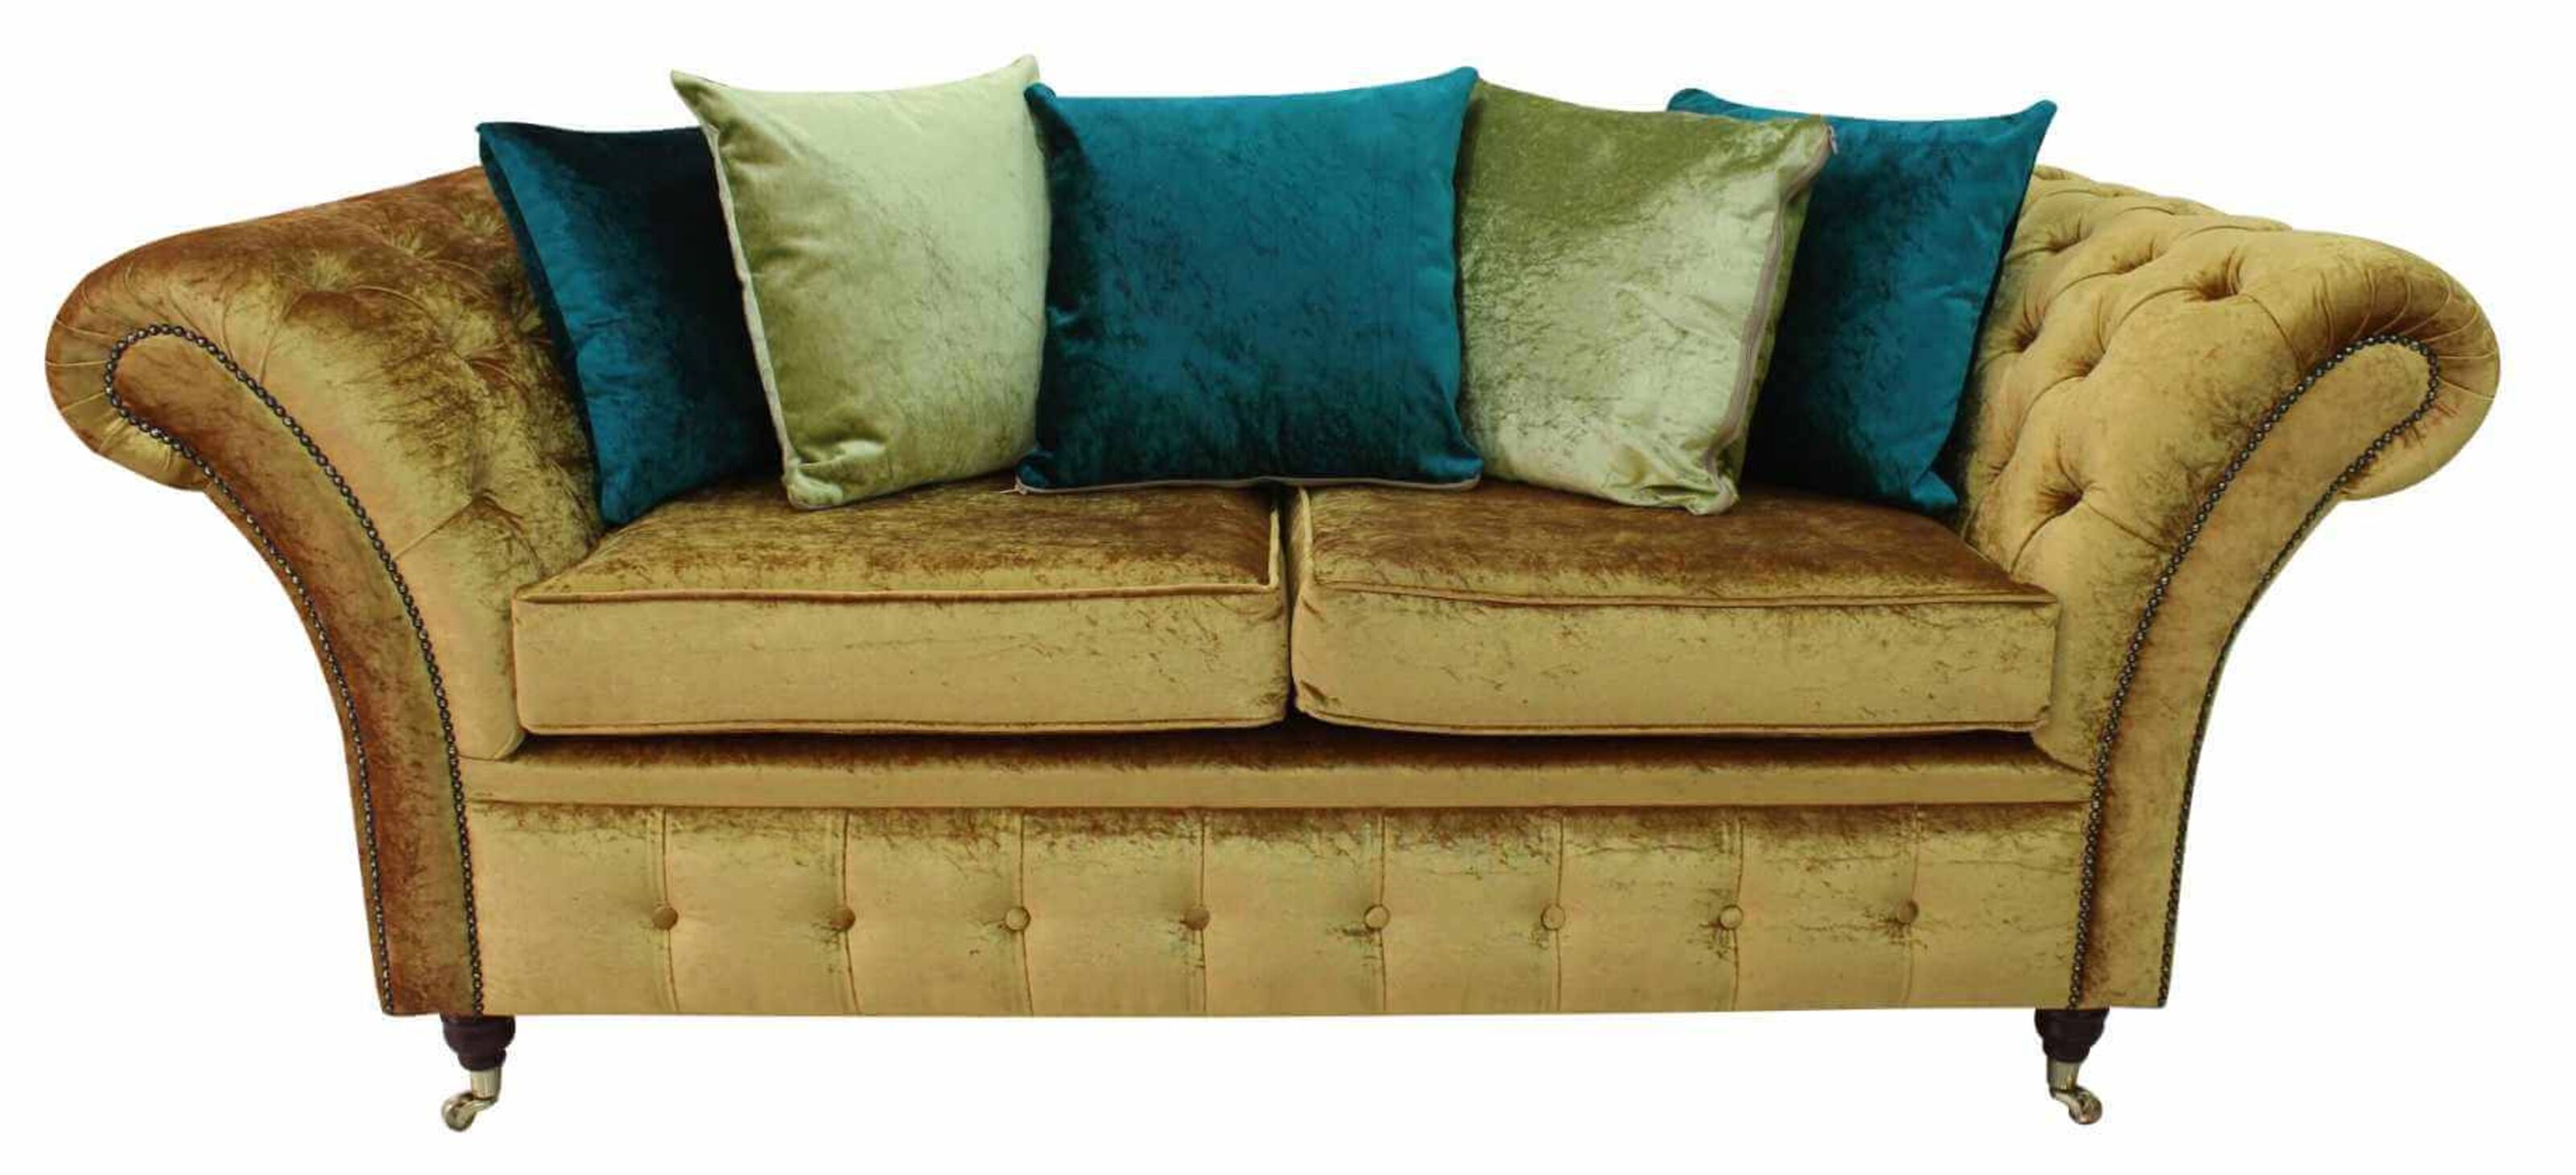 Plush Additions Chesterfield Sofas Adorned with Accent Pillows  %Post Title